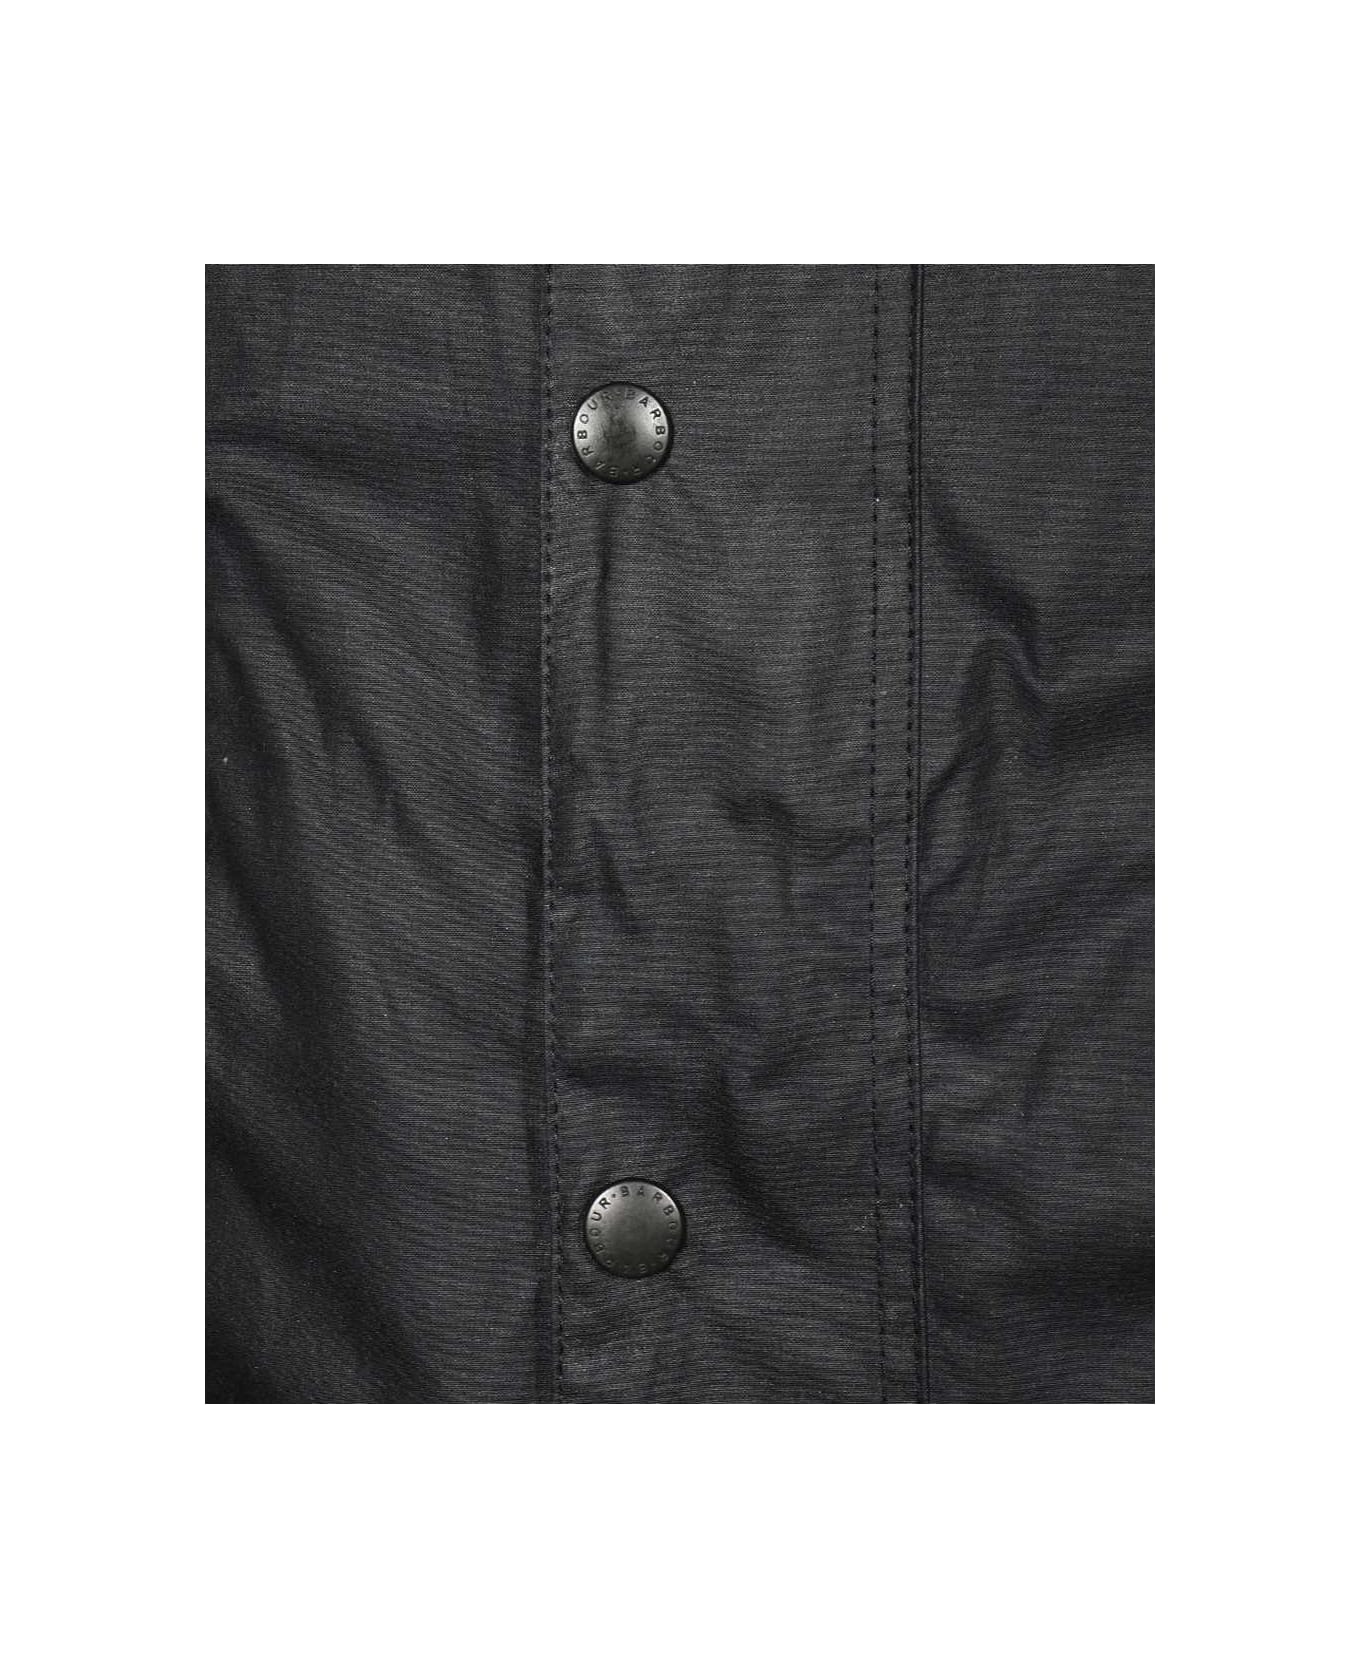 Barbour Waxed Cotton Jacket - blue